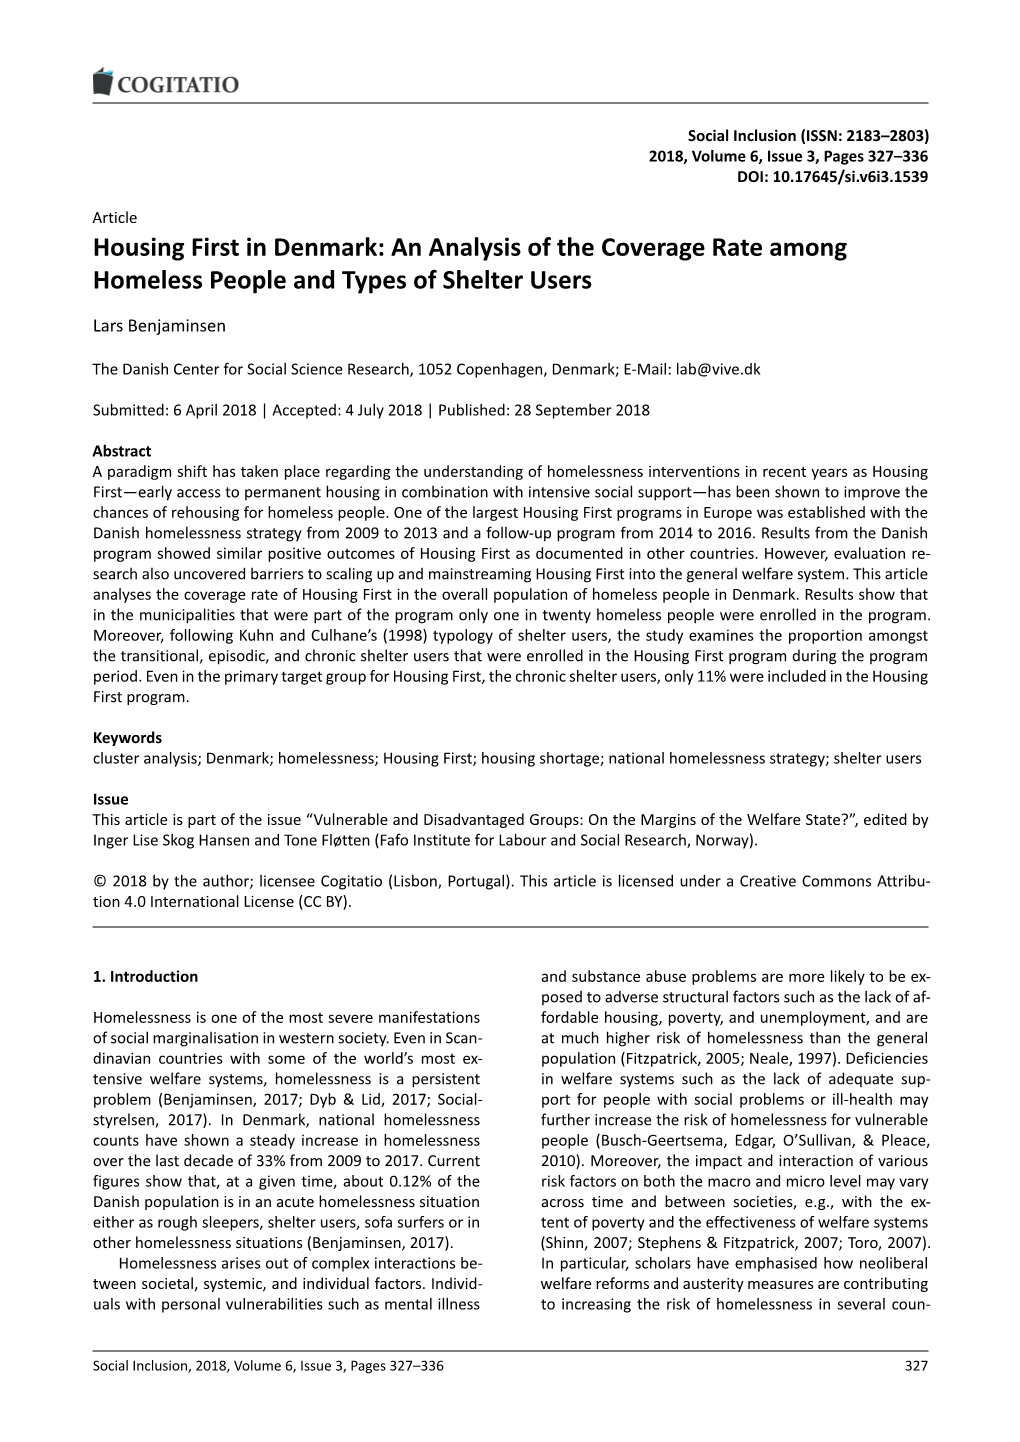 Housing First in Denmark: an Analysis of the Coverage Rate Among Homeless People and Types of Shelter Users